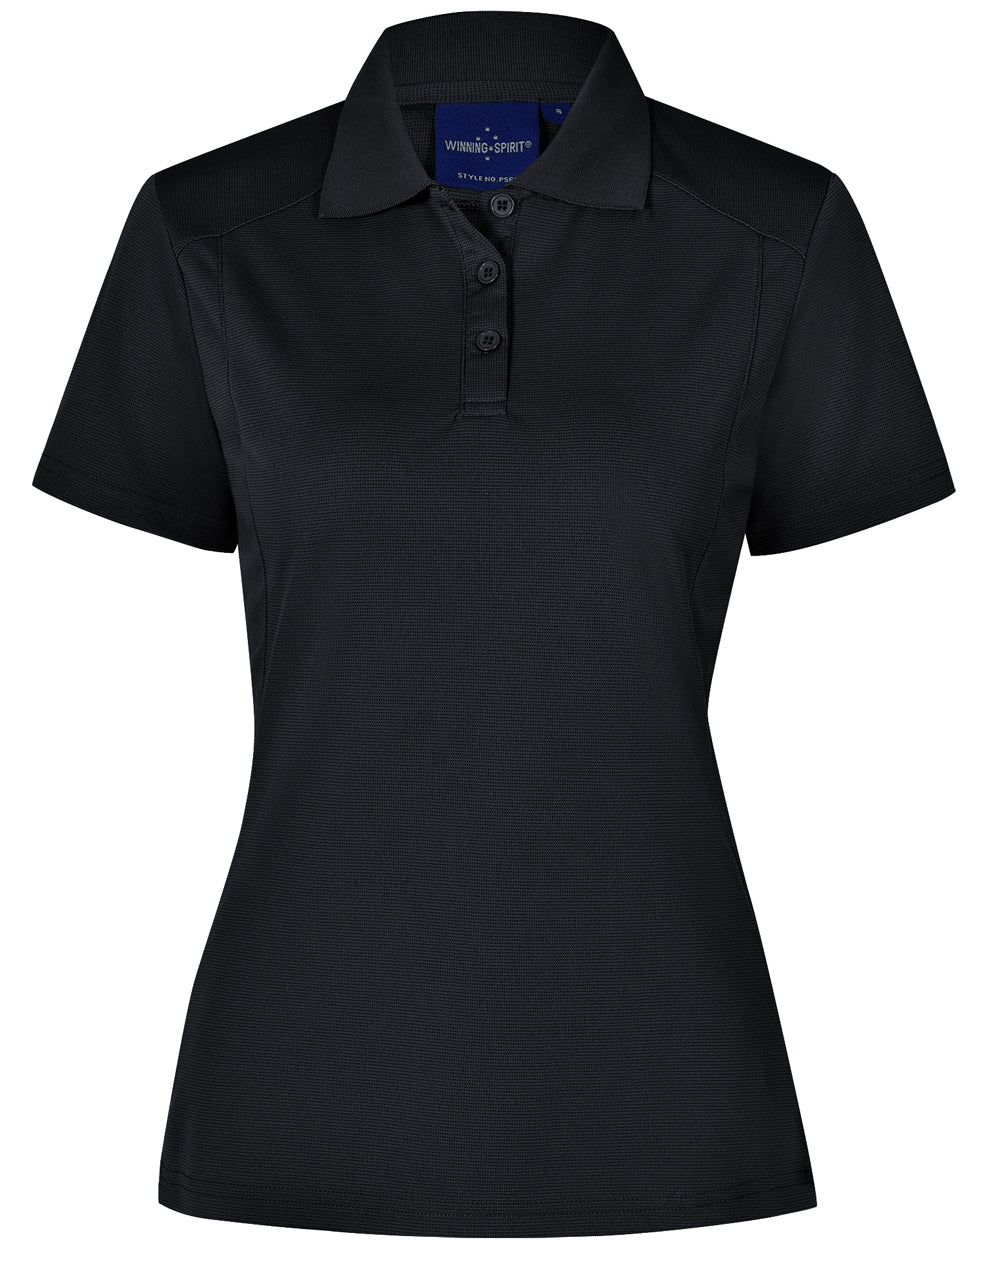 Ladies Short Sleeve Bamboo Eco Polo - made by AIW